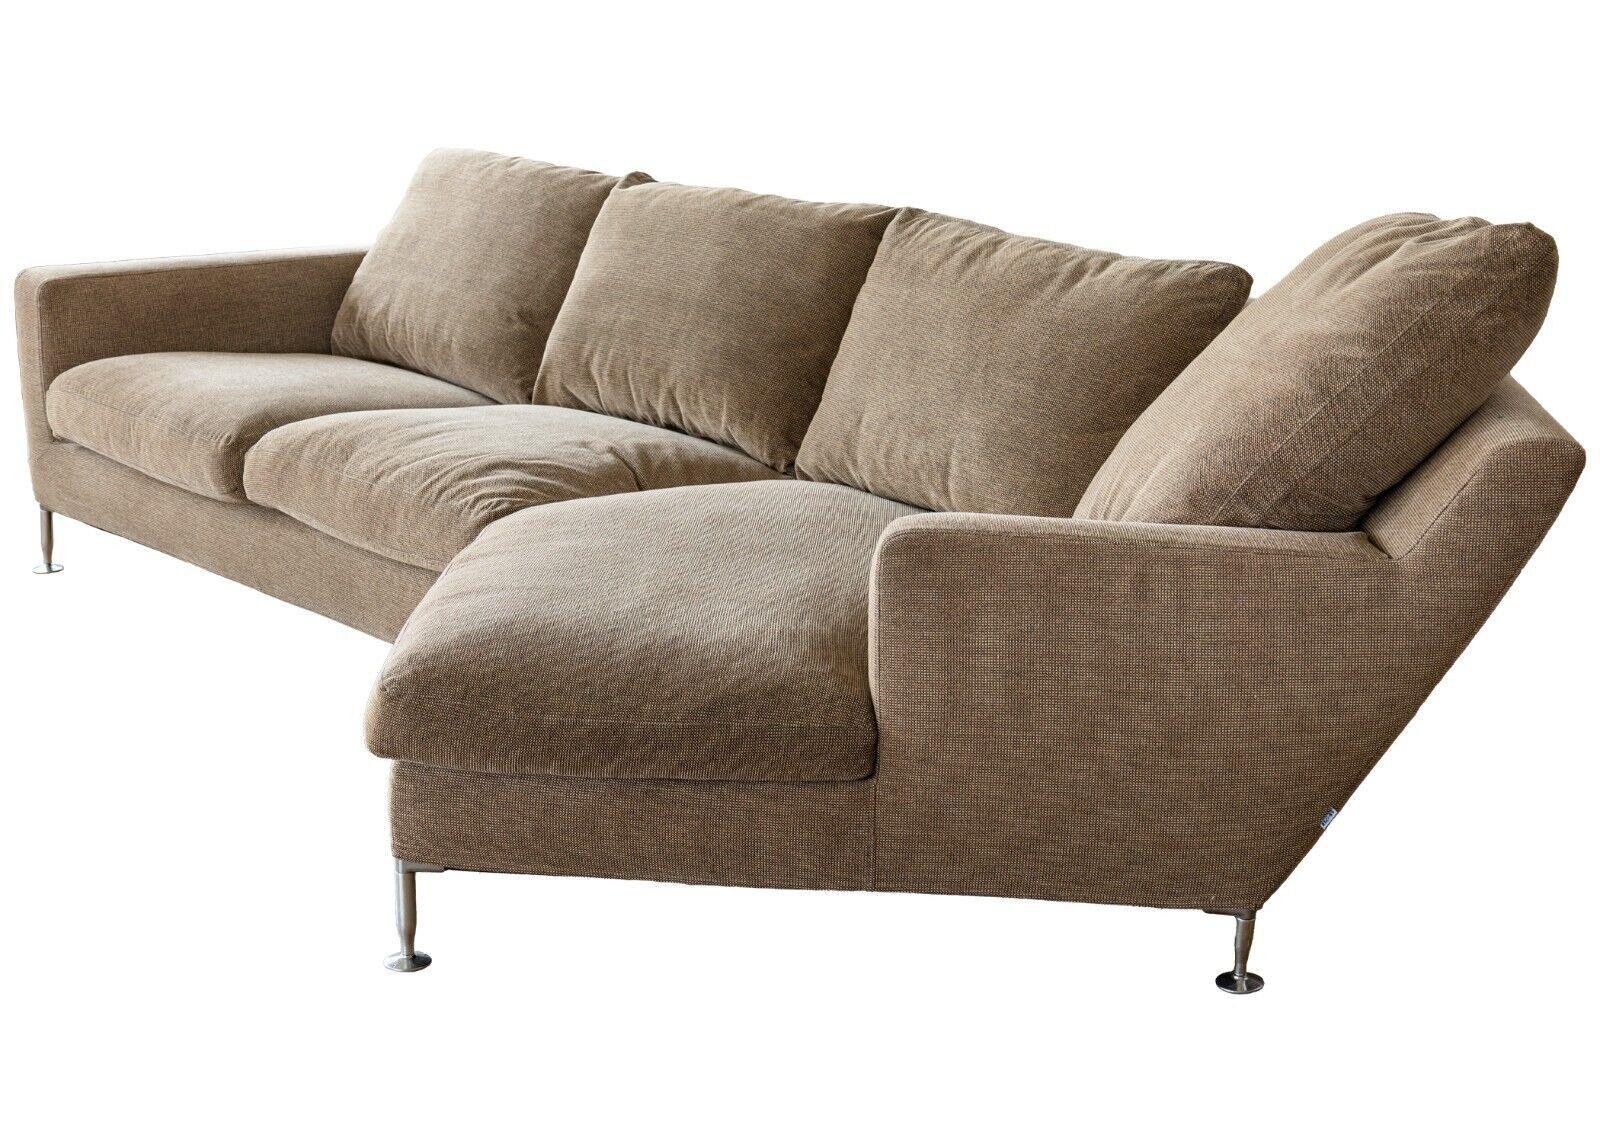 A modern B&B Italia The Harry sofa by Antonio Citterio. A beautifully unique sofa with a modern design. This wonderful sofa features an asymmetrical design, with one side showing a longer seat and backing. This piece sits on chrome metal legs which